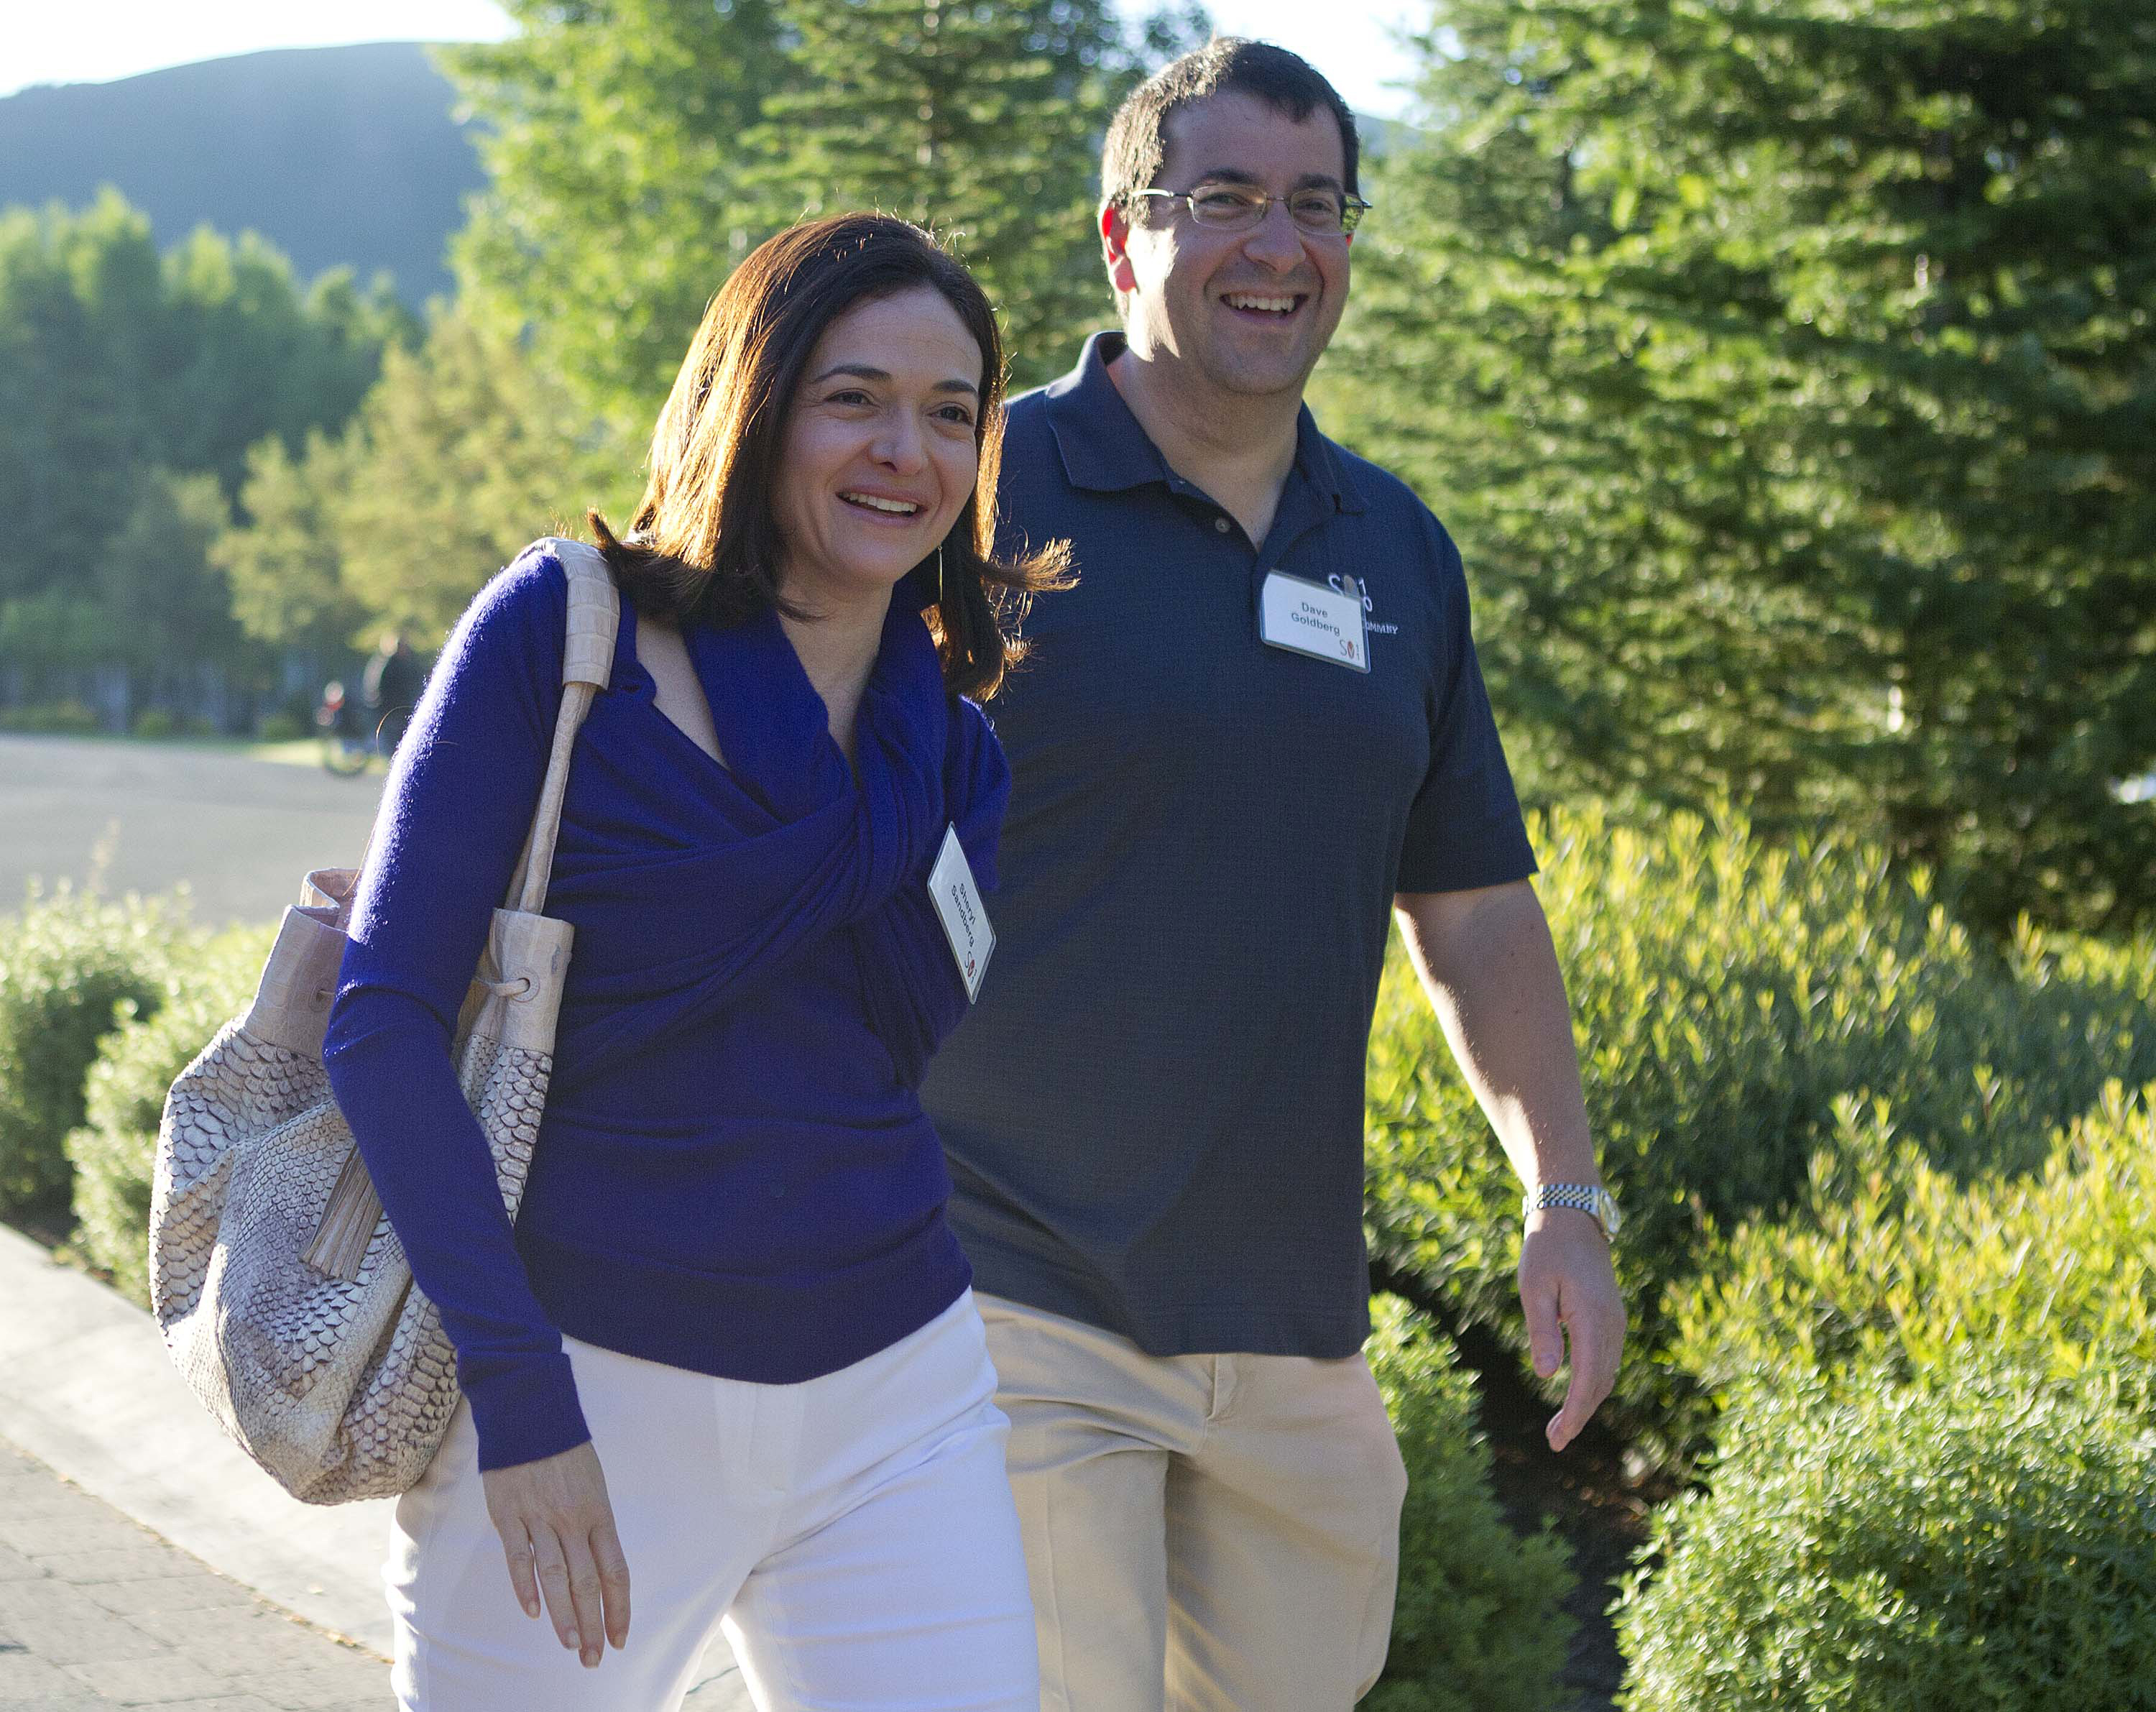 Facebook chief operating officer Sheryl Sandberg, left, and Dave Goldberg, CEO of Survey Monkey, arrive at the Sun Valley Inn for the 2011 Allen and Co. Sun Valley Conference, on July 6, 2011, in Sun Valley, Idaho. (Julie Jacobson—AP)